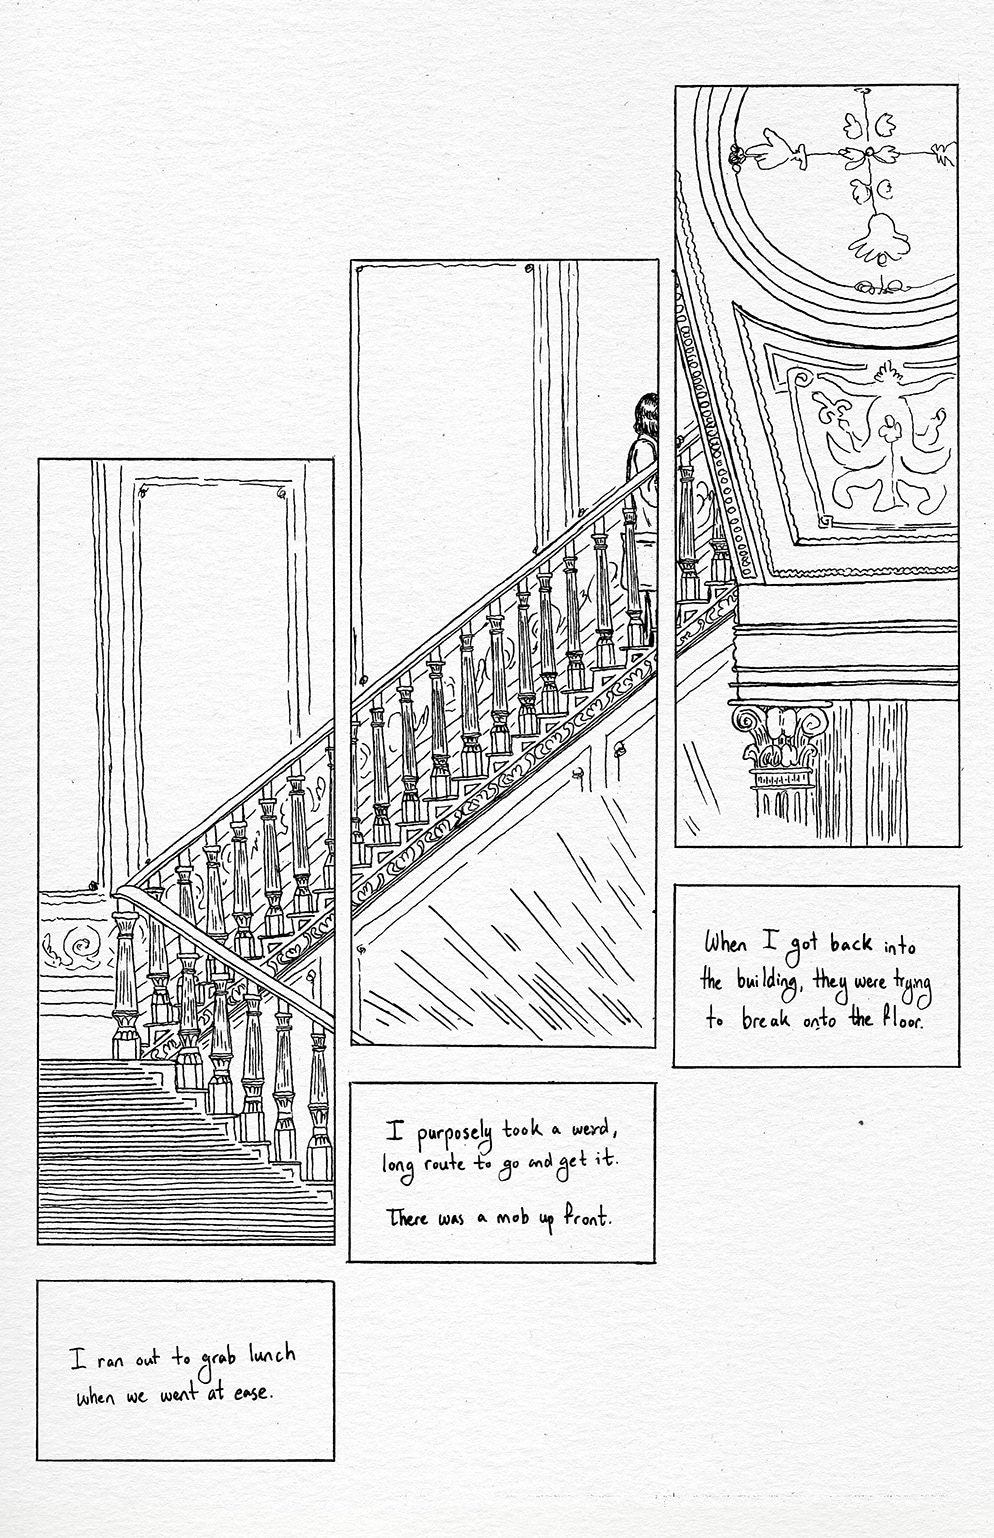 An image of an ornate staircase depicted from the side in the Capitol building, a continuous image broken into three separate panels. Rep. Pohutsky is walking up the stairs, holding onto the railing. There is noise from a crowd coming from the hallway below the staircase.
She recounts what had transpired over the past few hours. 

“I ran out to grab lunch when we went at ease.”
“I purposely took a weird, long route to go and get it. There was a mob up front.”
“When I got back into the building, they were trying to break onto the floor.”